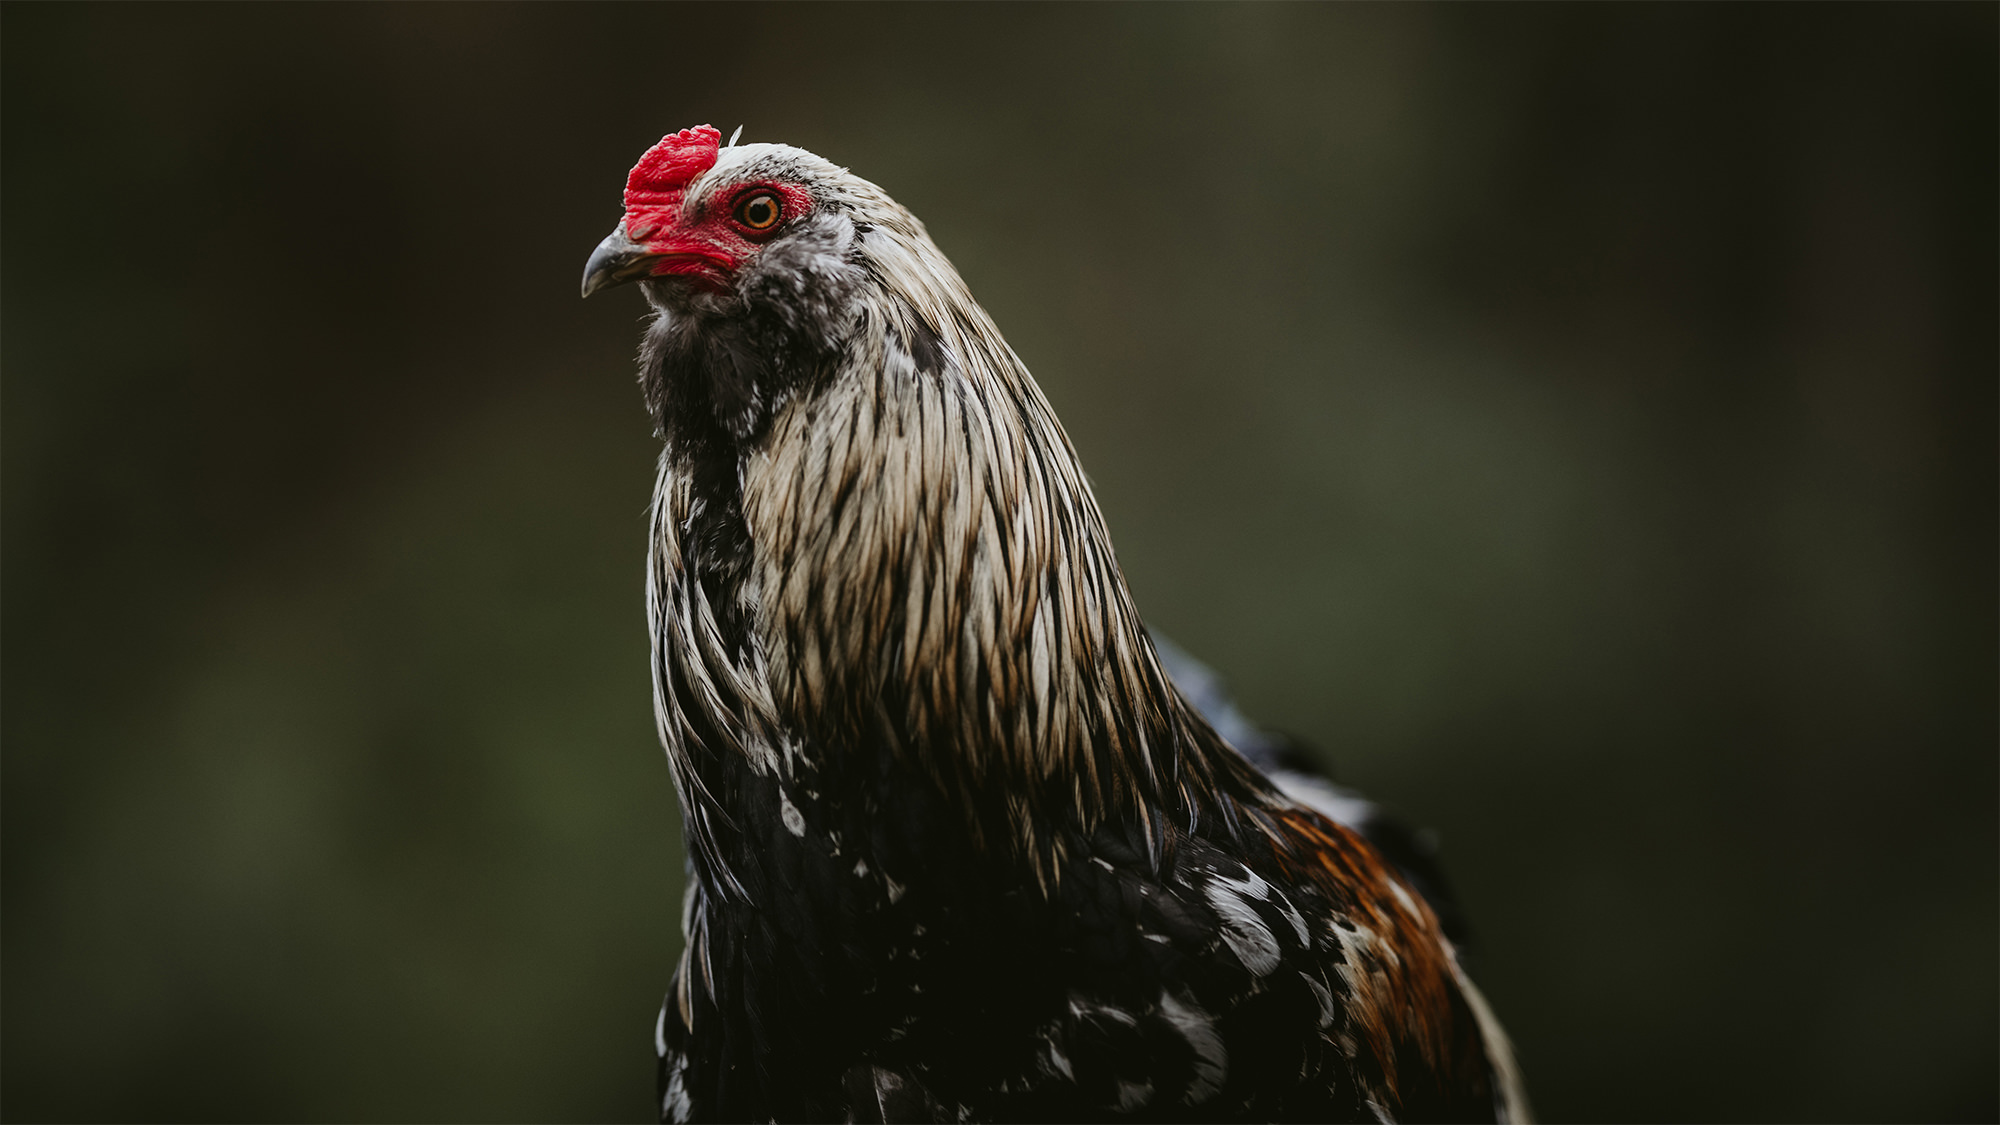 A regal rooster poses for a portrait.